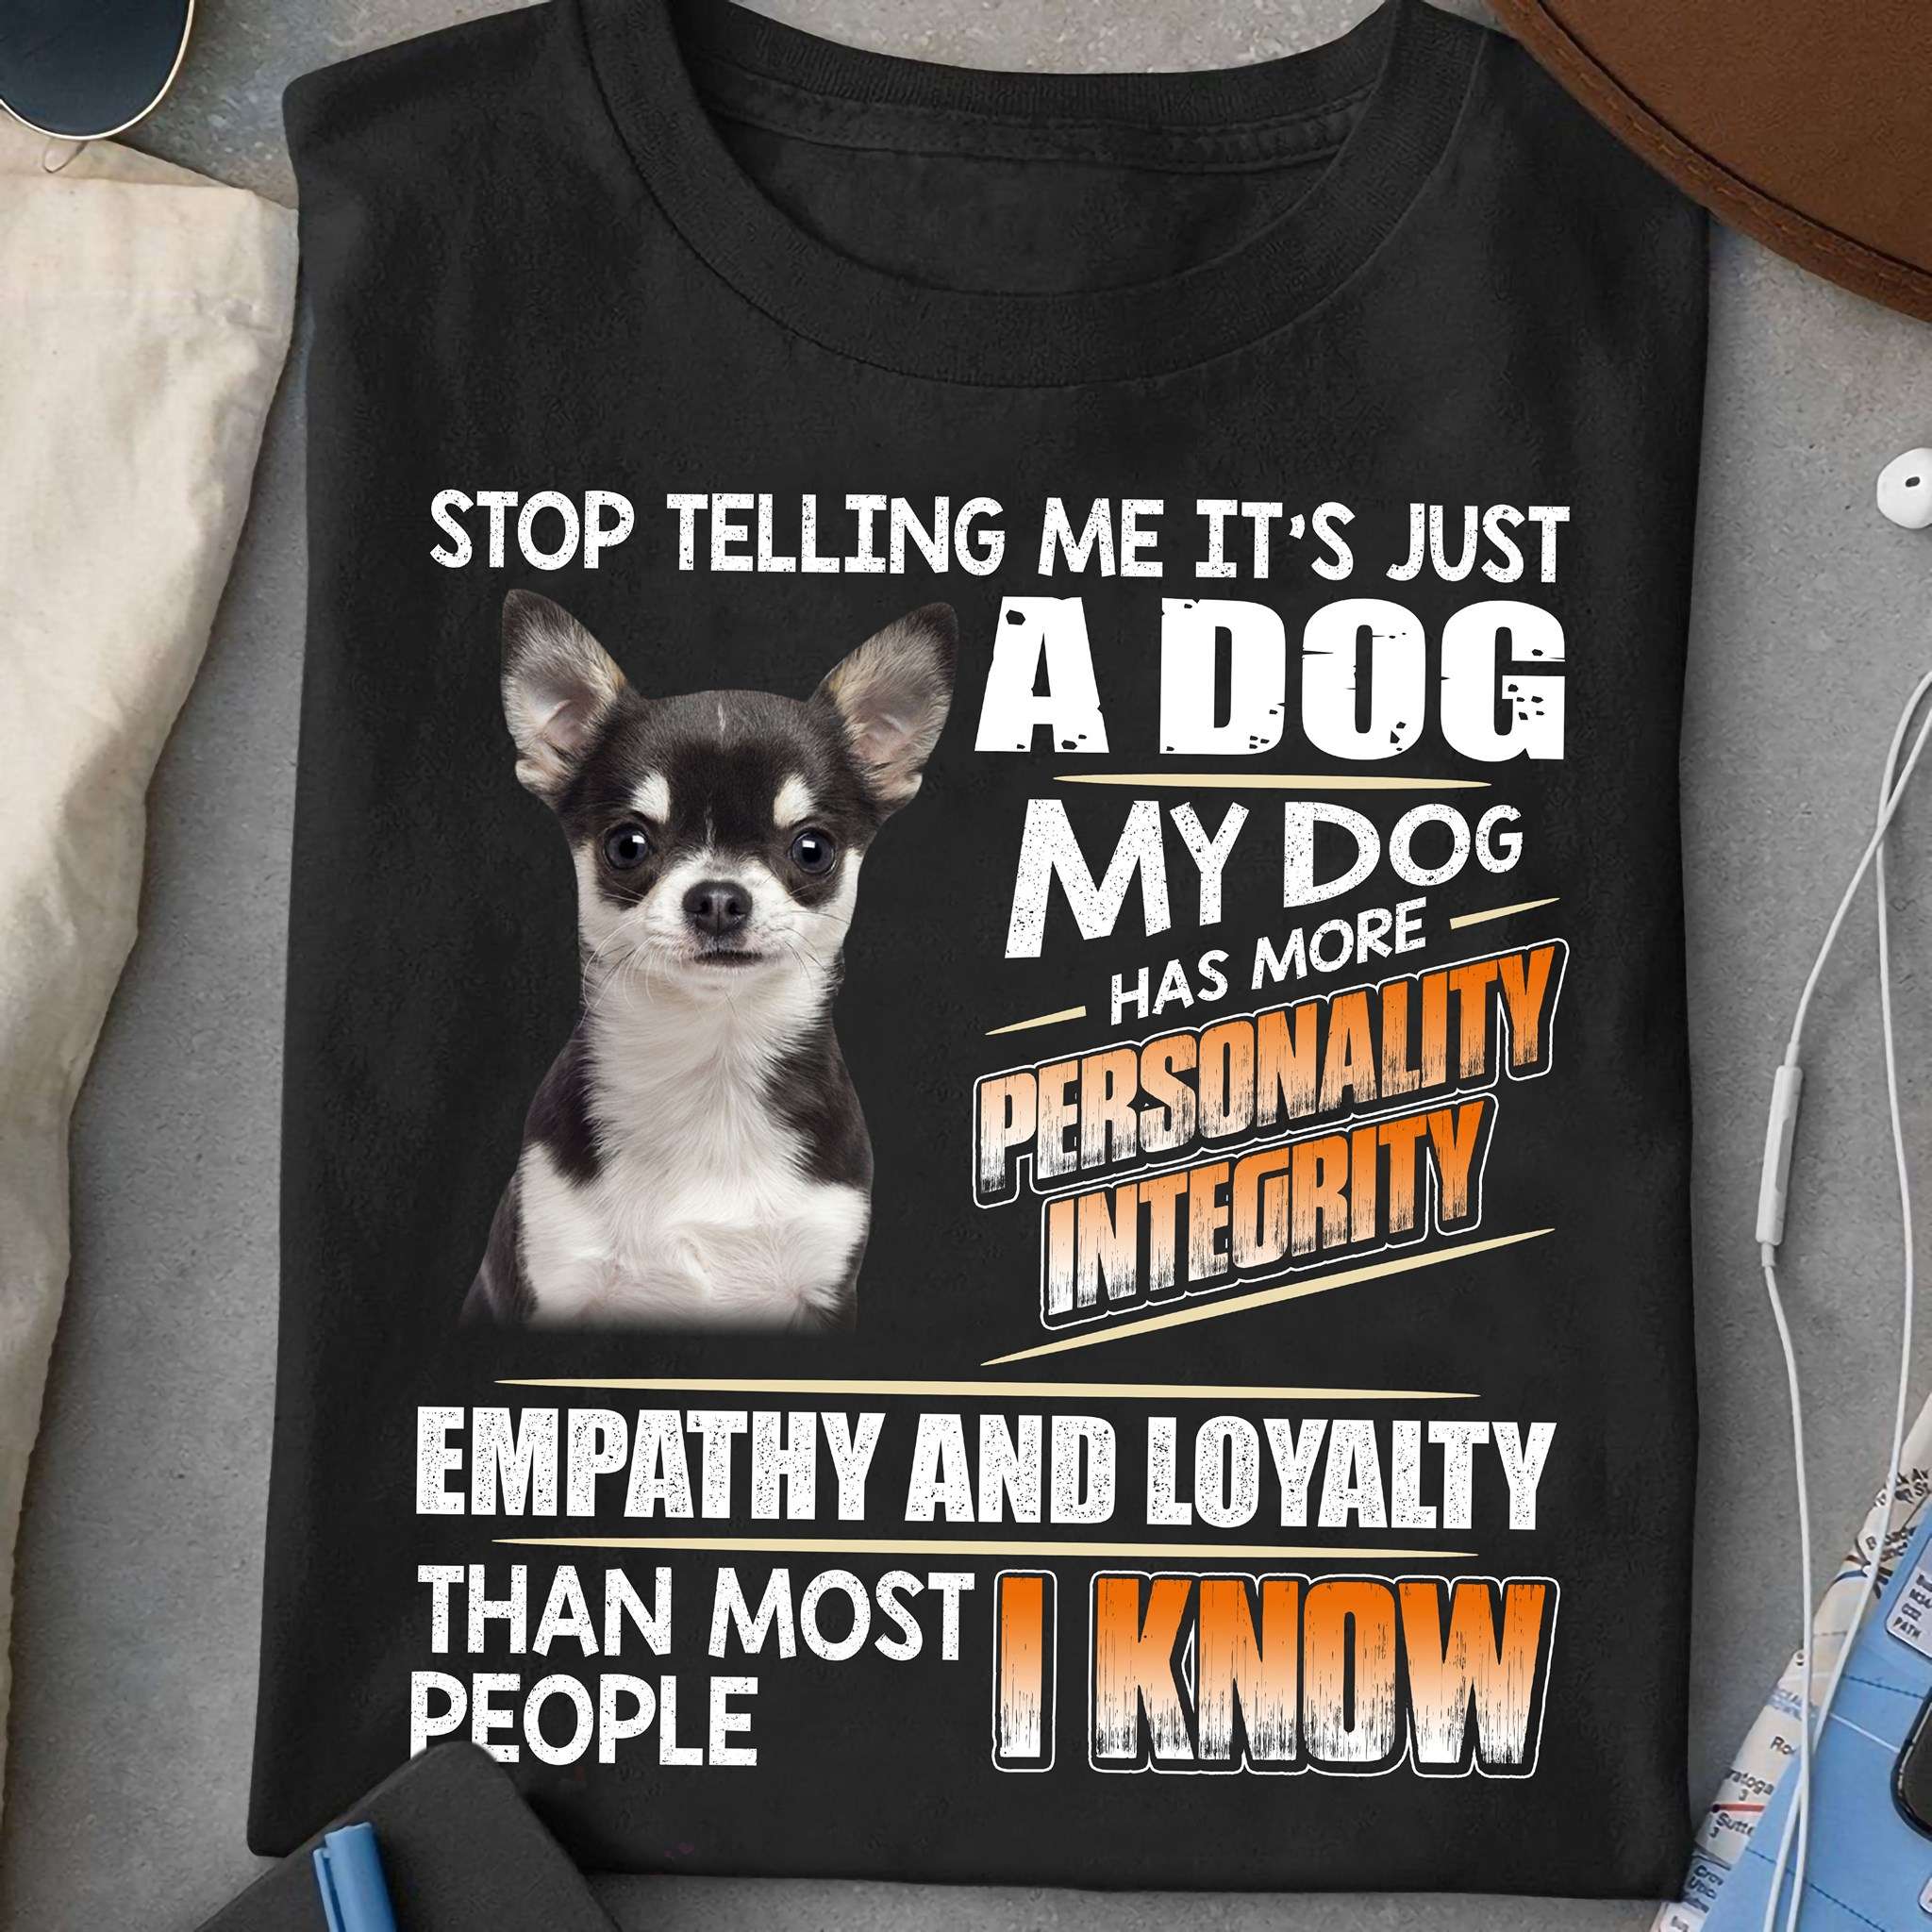 Chihuahua Dog - Stop telling me it's just a dog has more personality integrity ampathy and loyalty